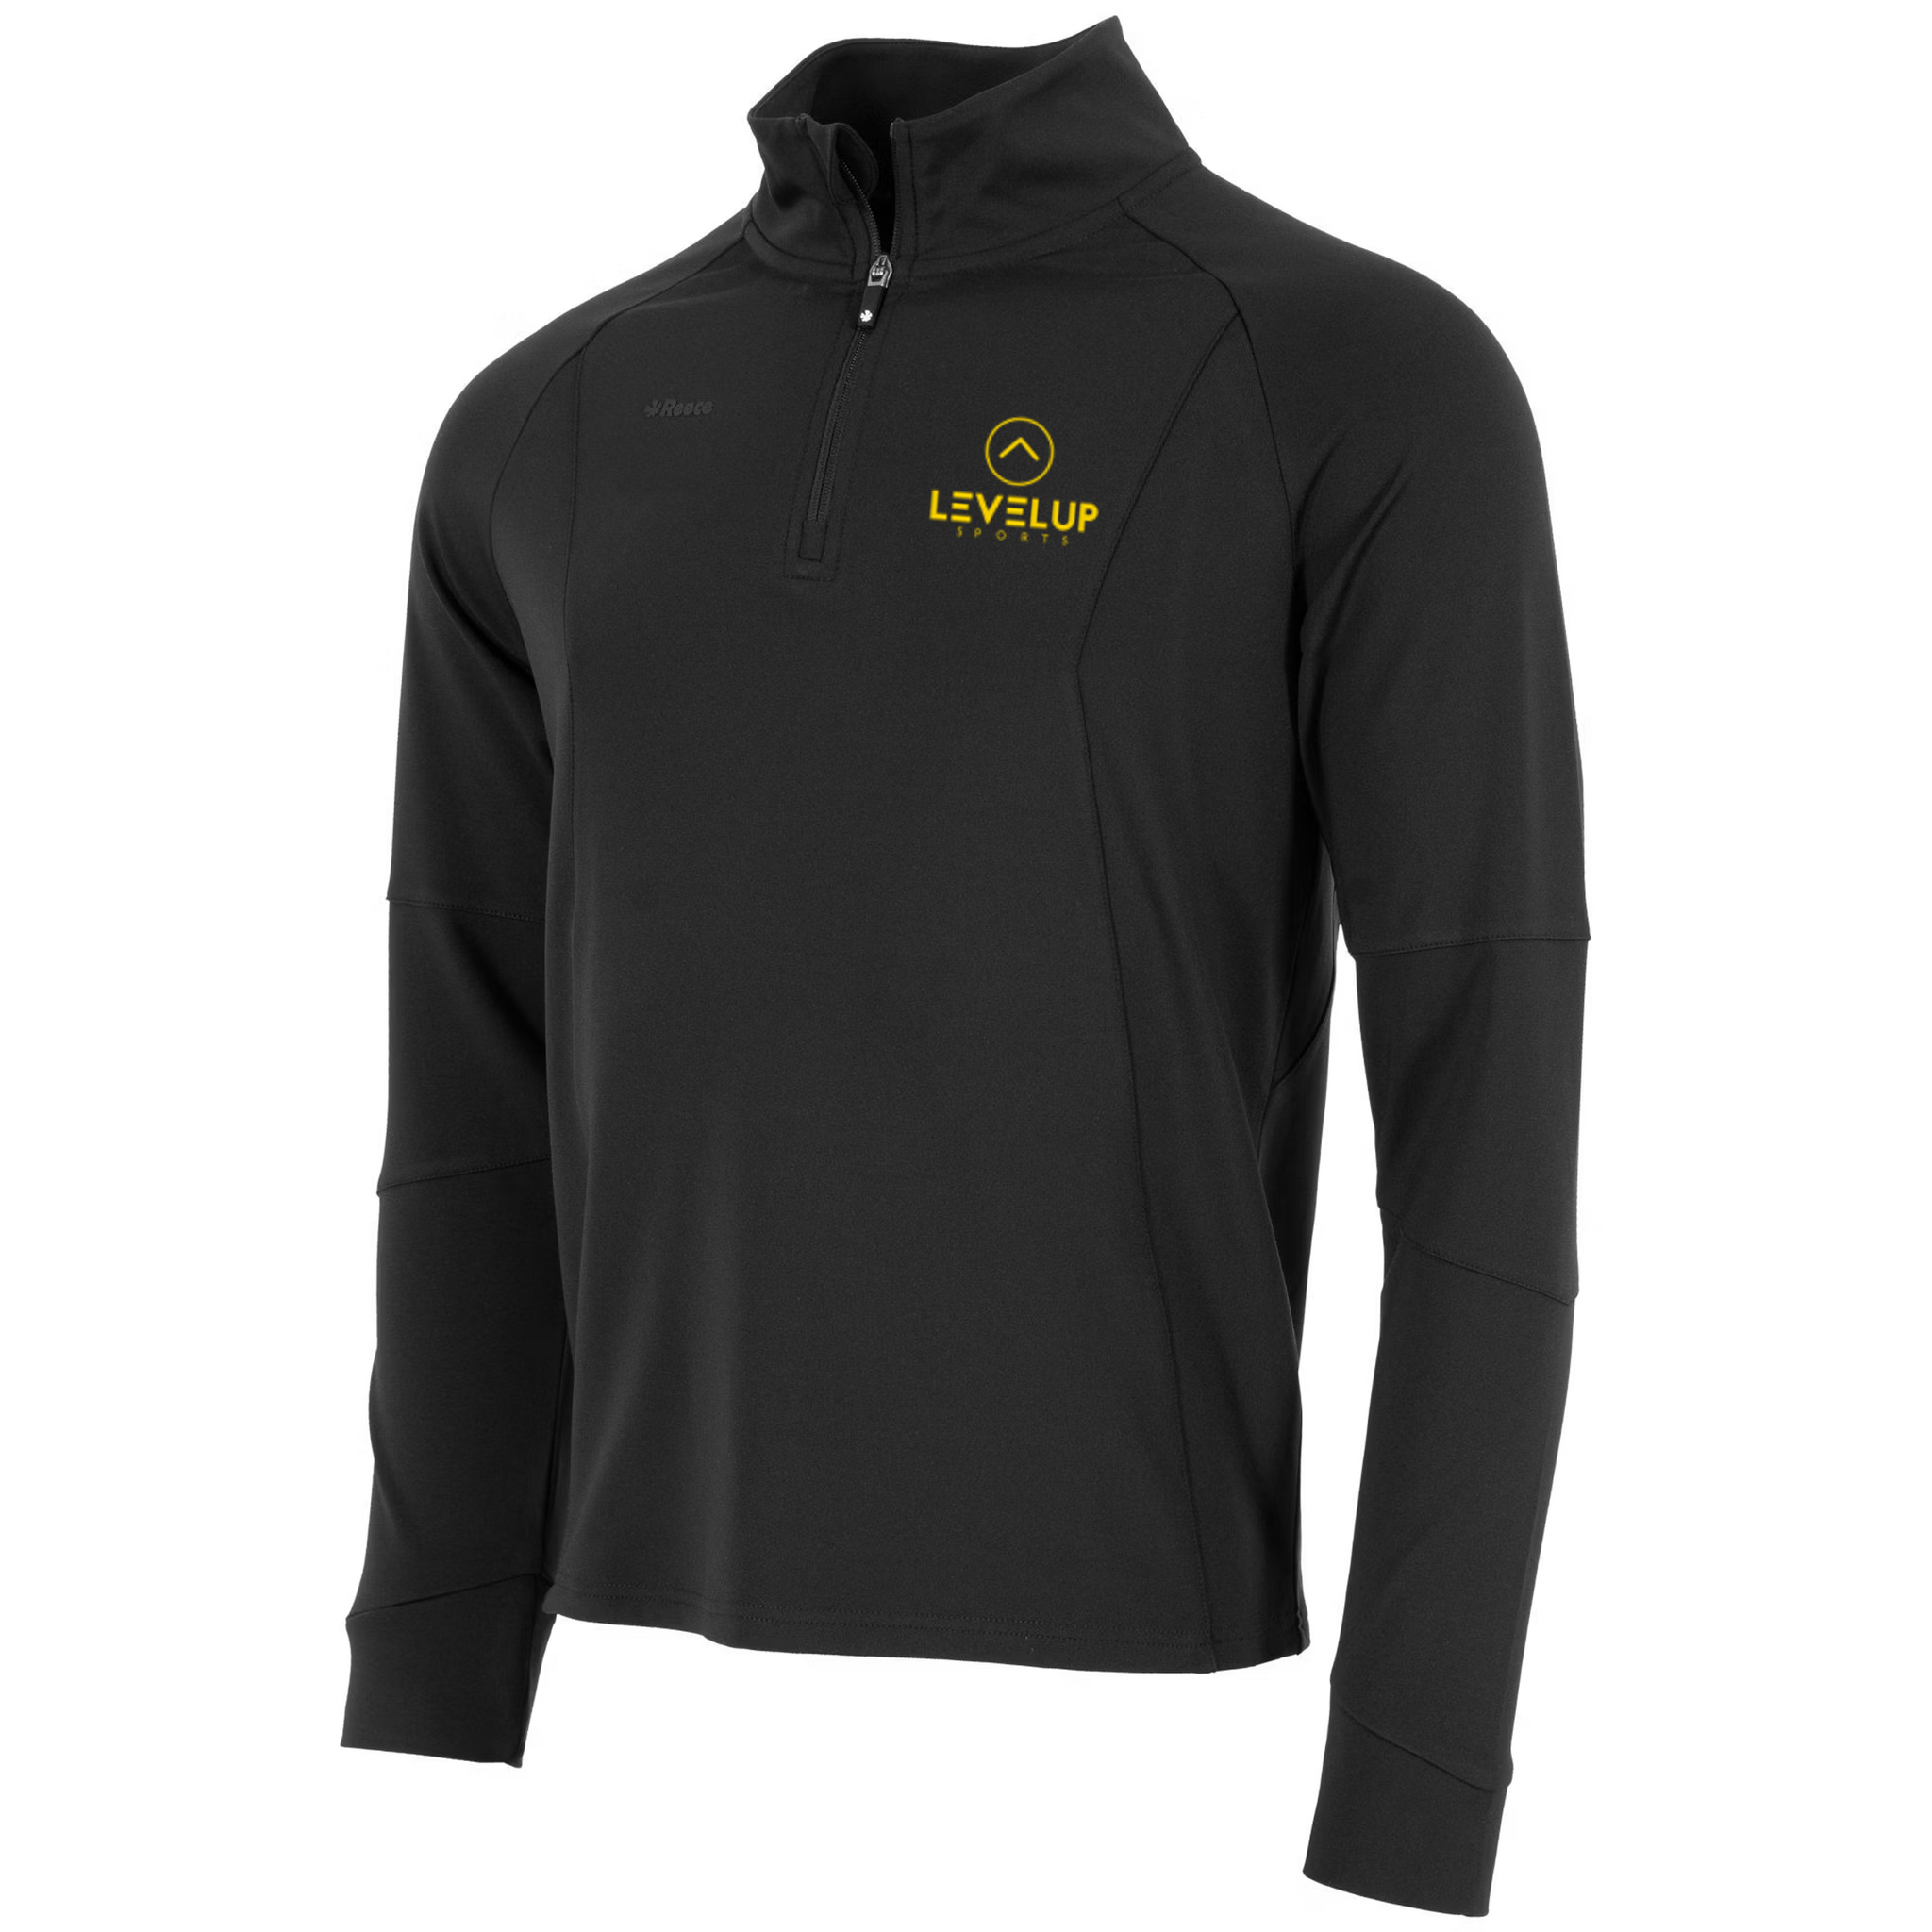 Levelupsports Reece Stretched Fit Quarter Zip Top